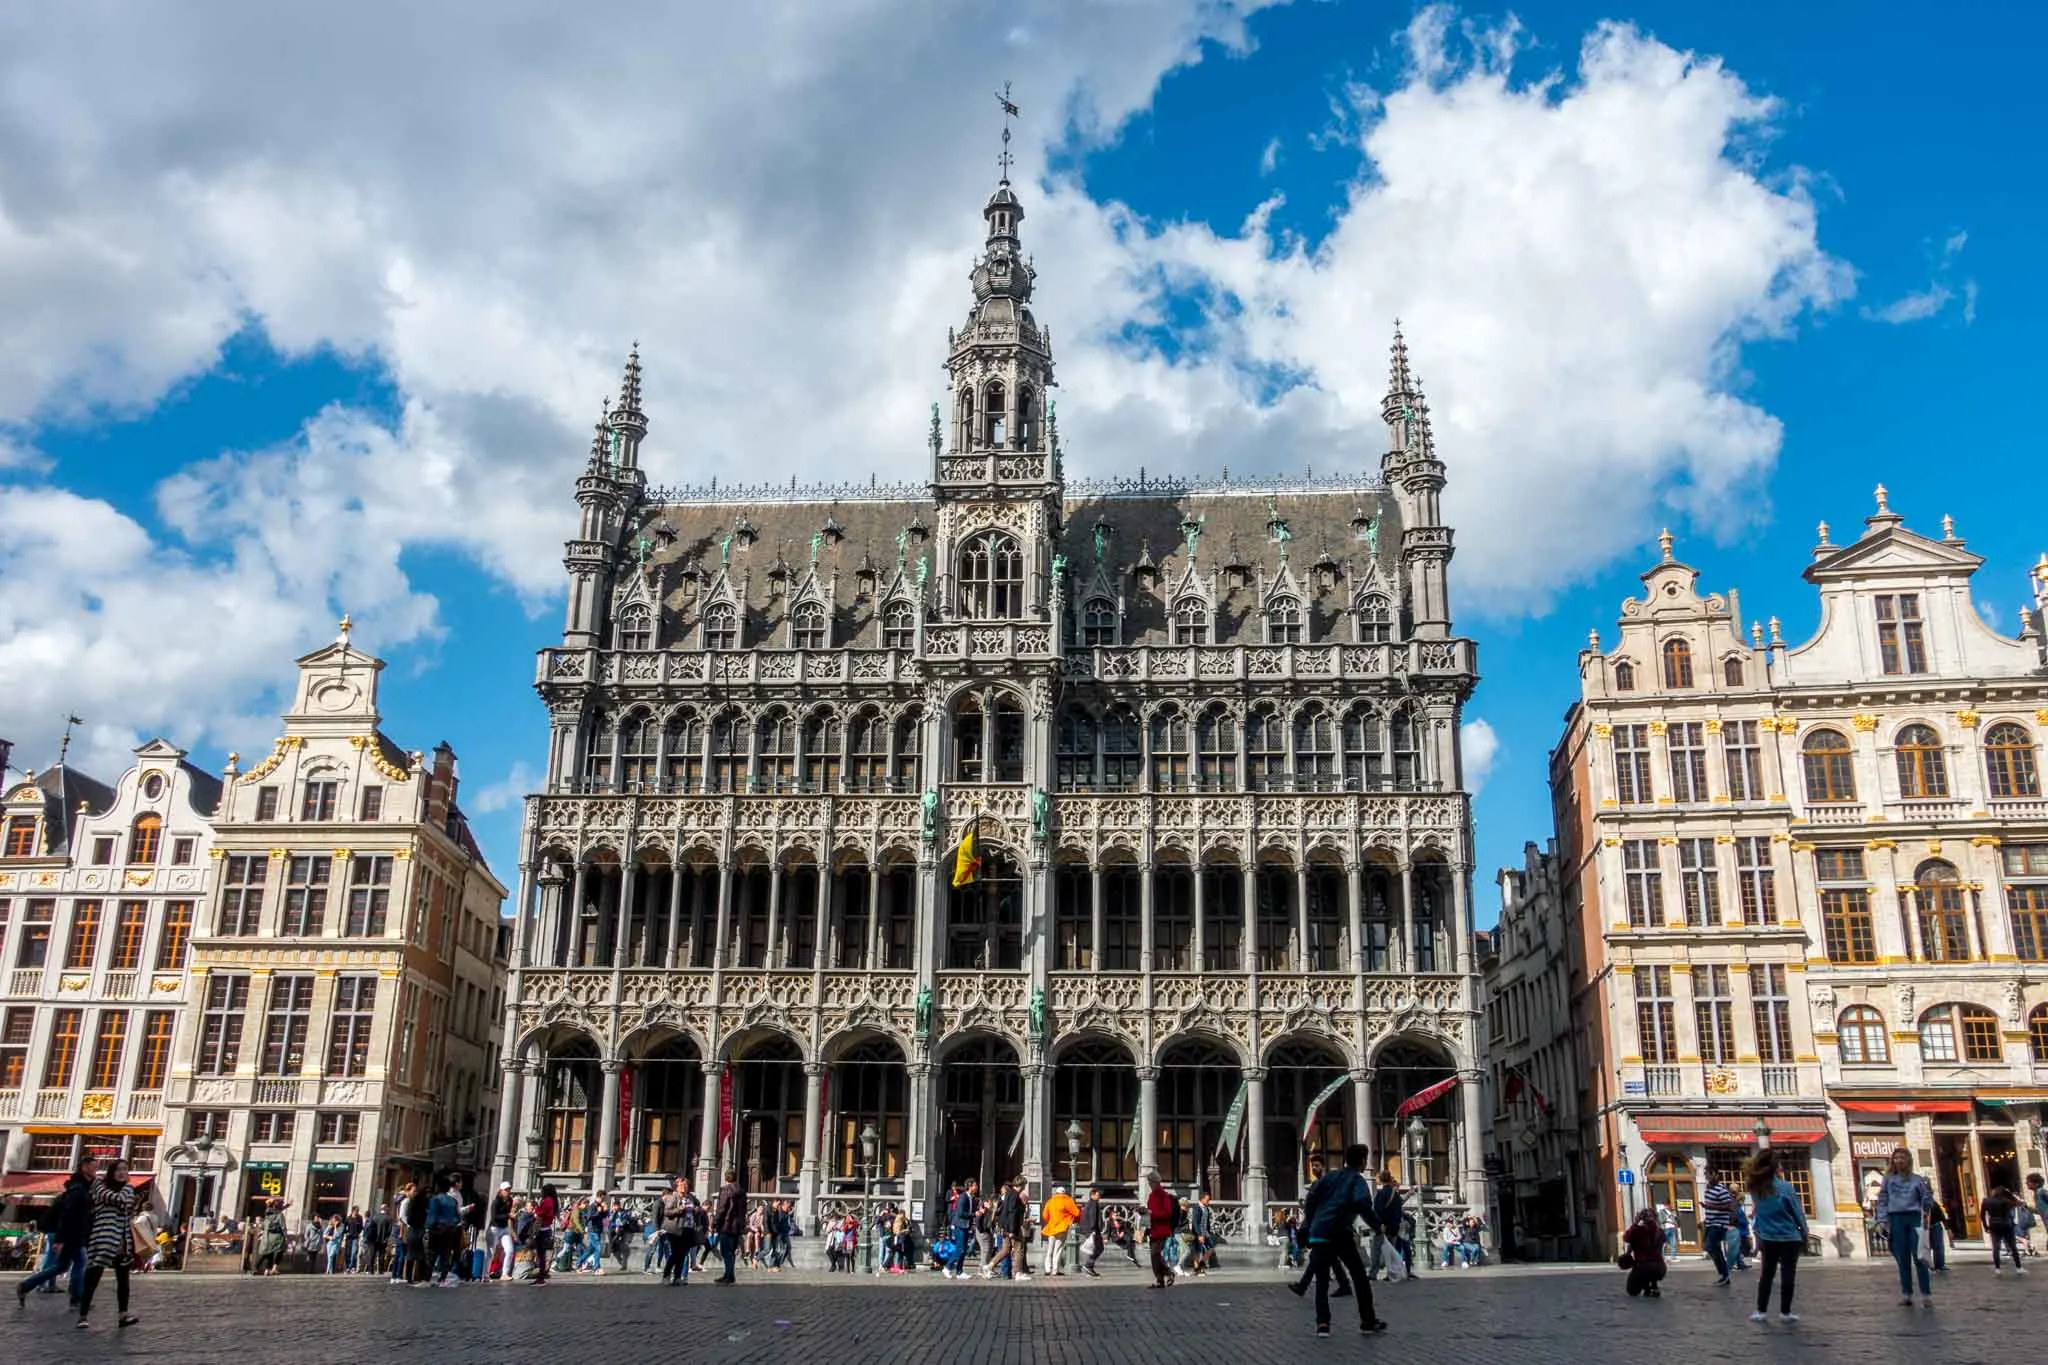 Visiting the Grand Place is one of the top things to do in Brussels Belgium